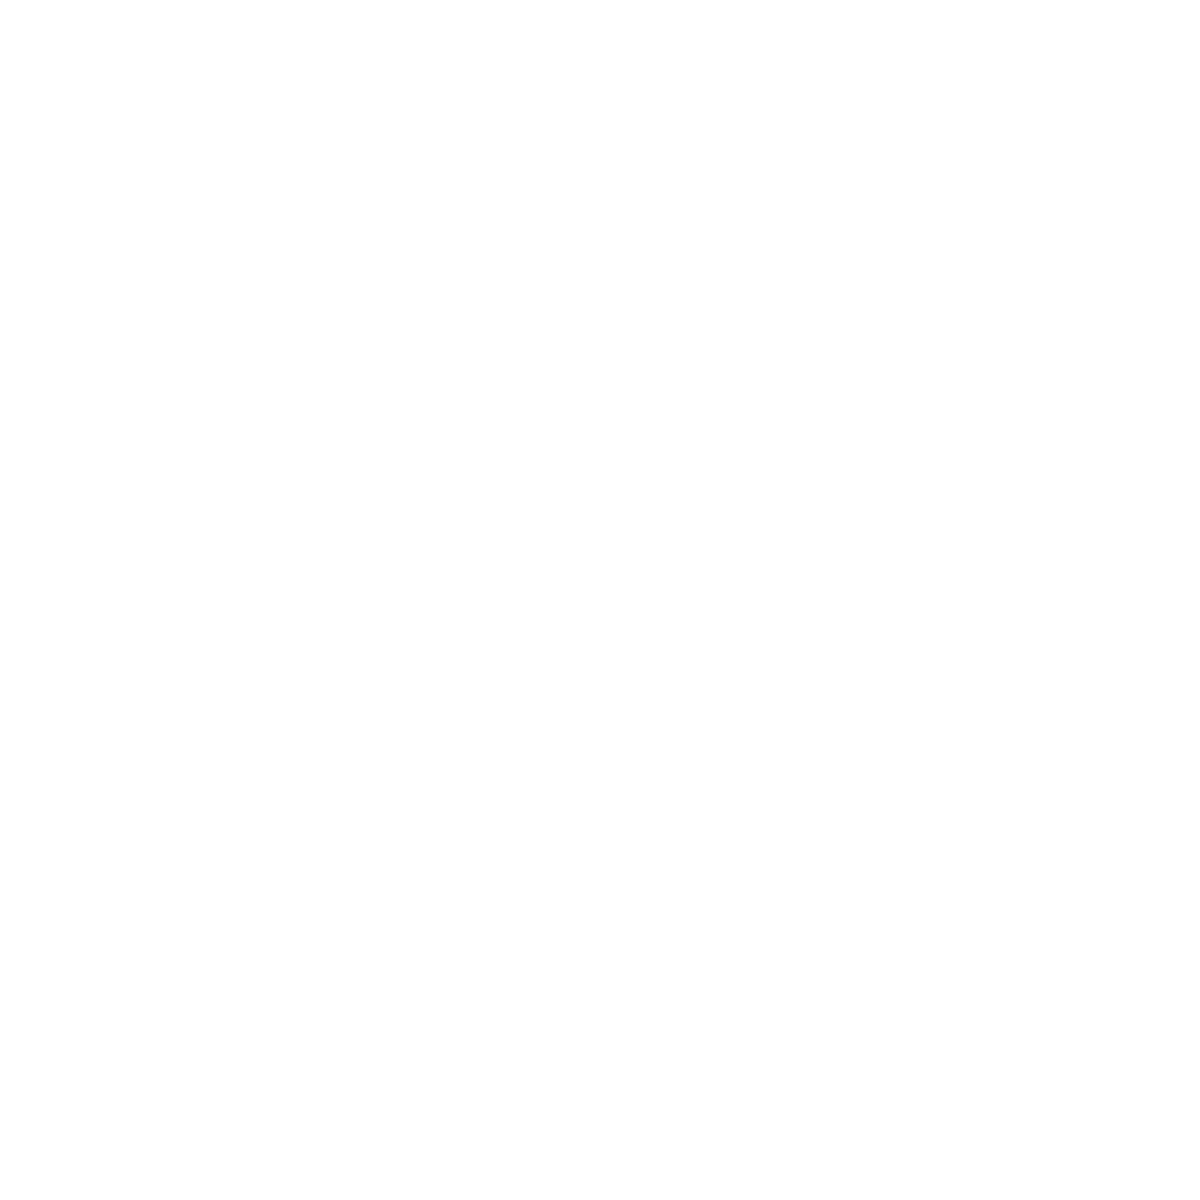 Product Podcast